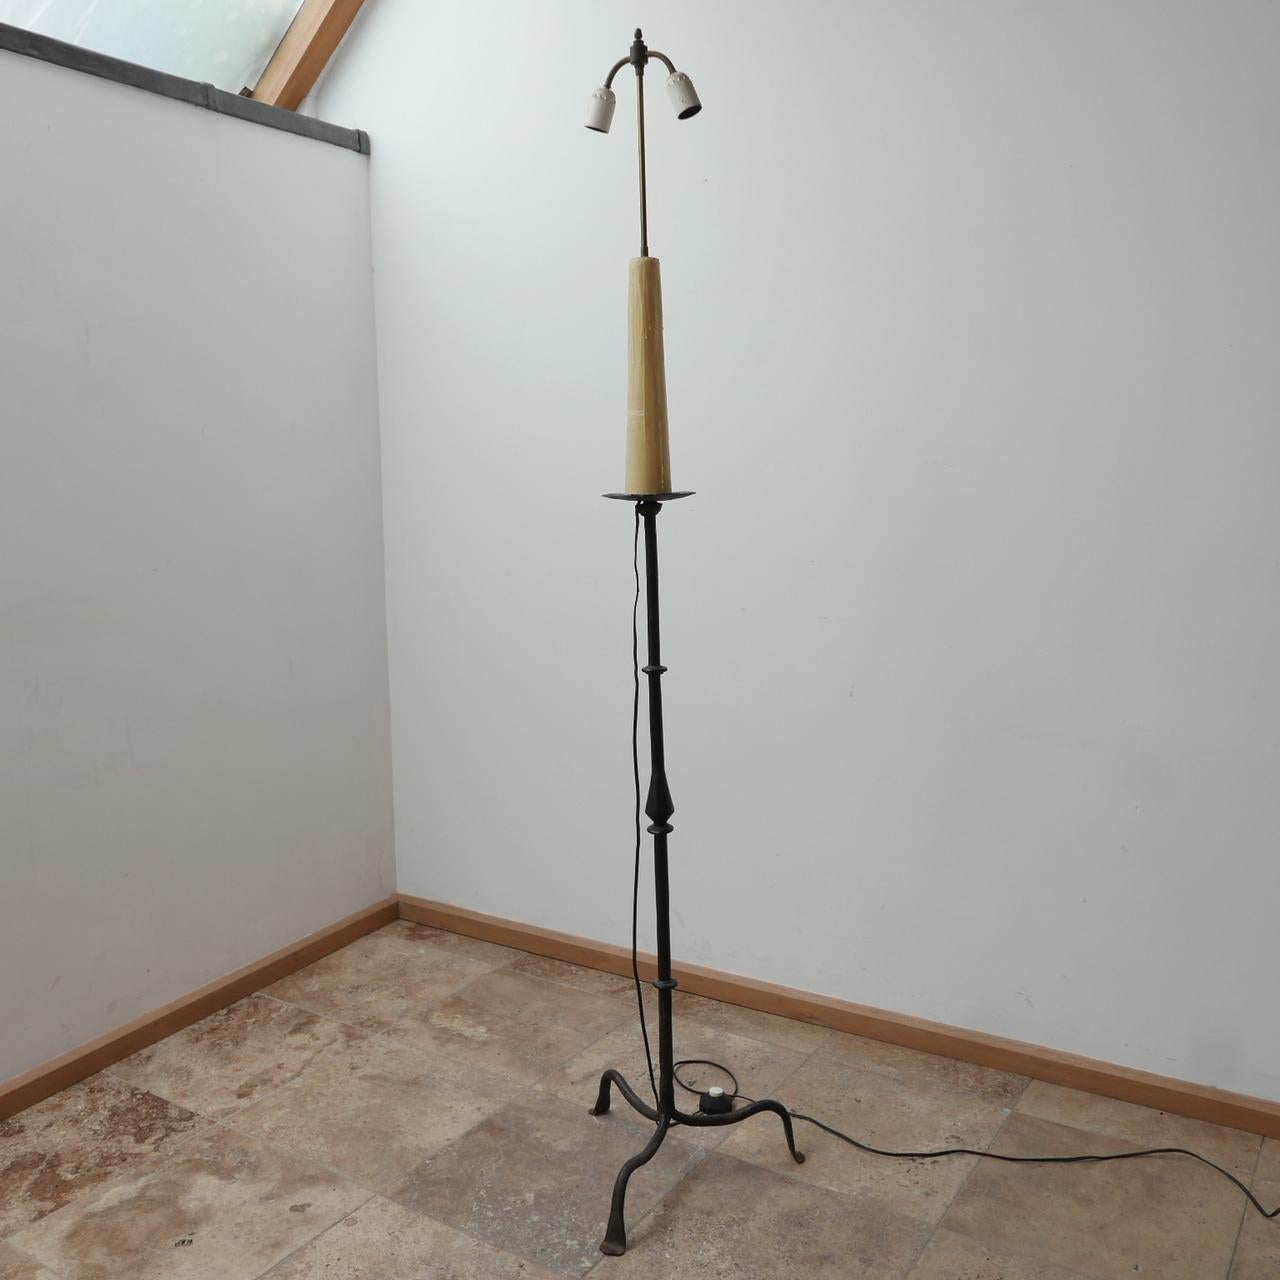 A tall iron floor lamp. 

France, c1950s. 

Original wax embellishment retained. 

Some wear to the wax but generally good condition. 

Since re-wired and PAT tested. 

Dimensions: 183 H x 40 W x 40 D in cm. 

Delivery: POA.
